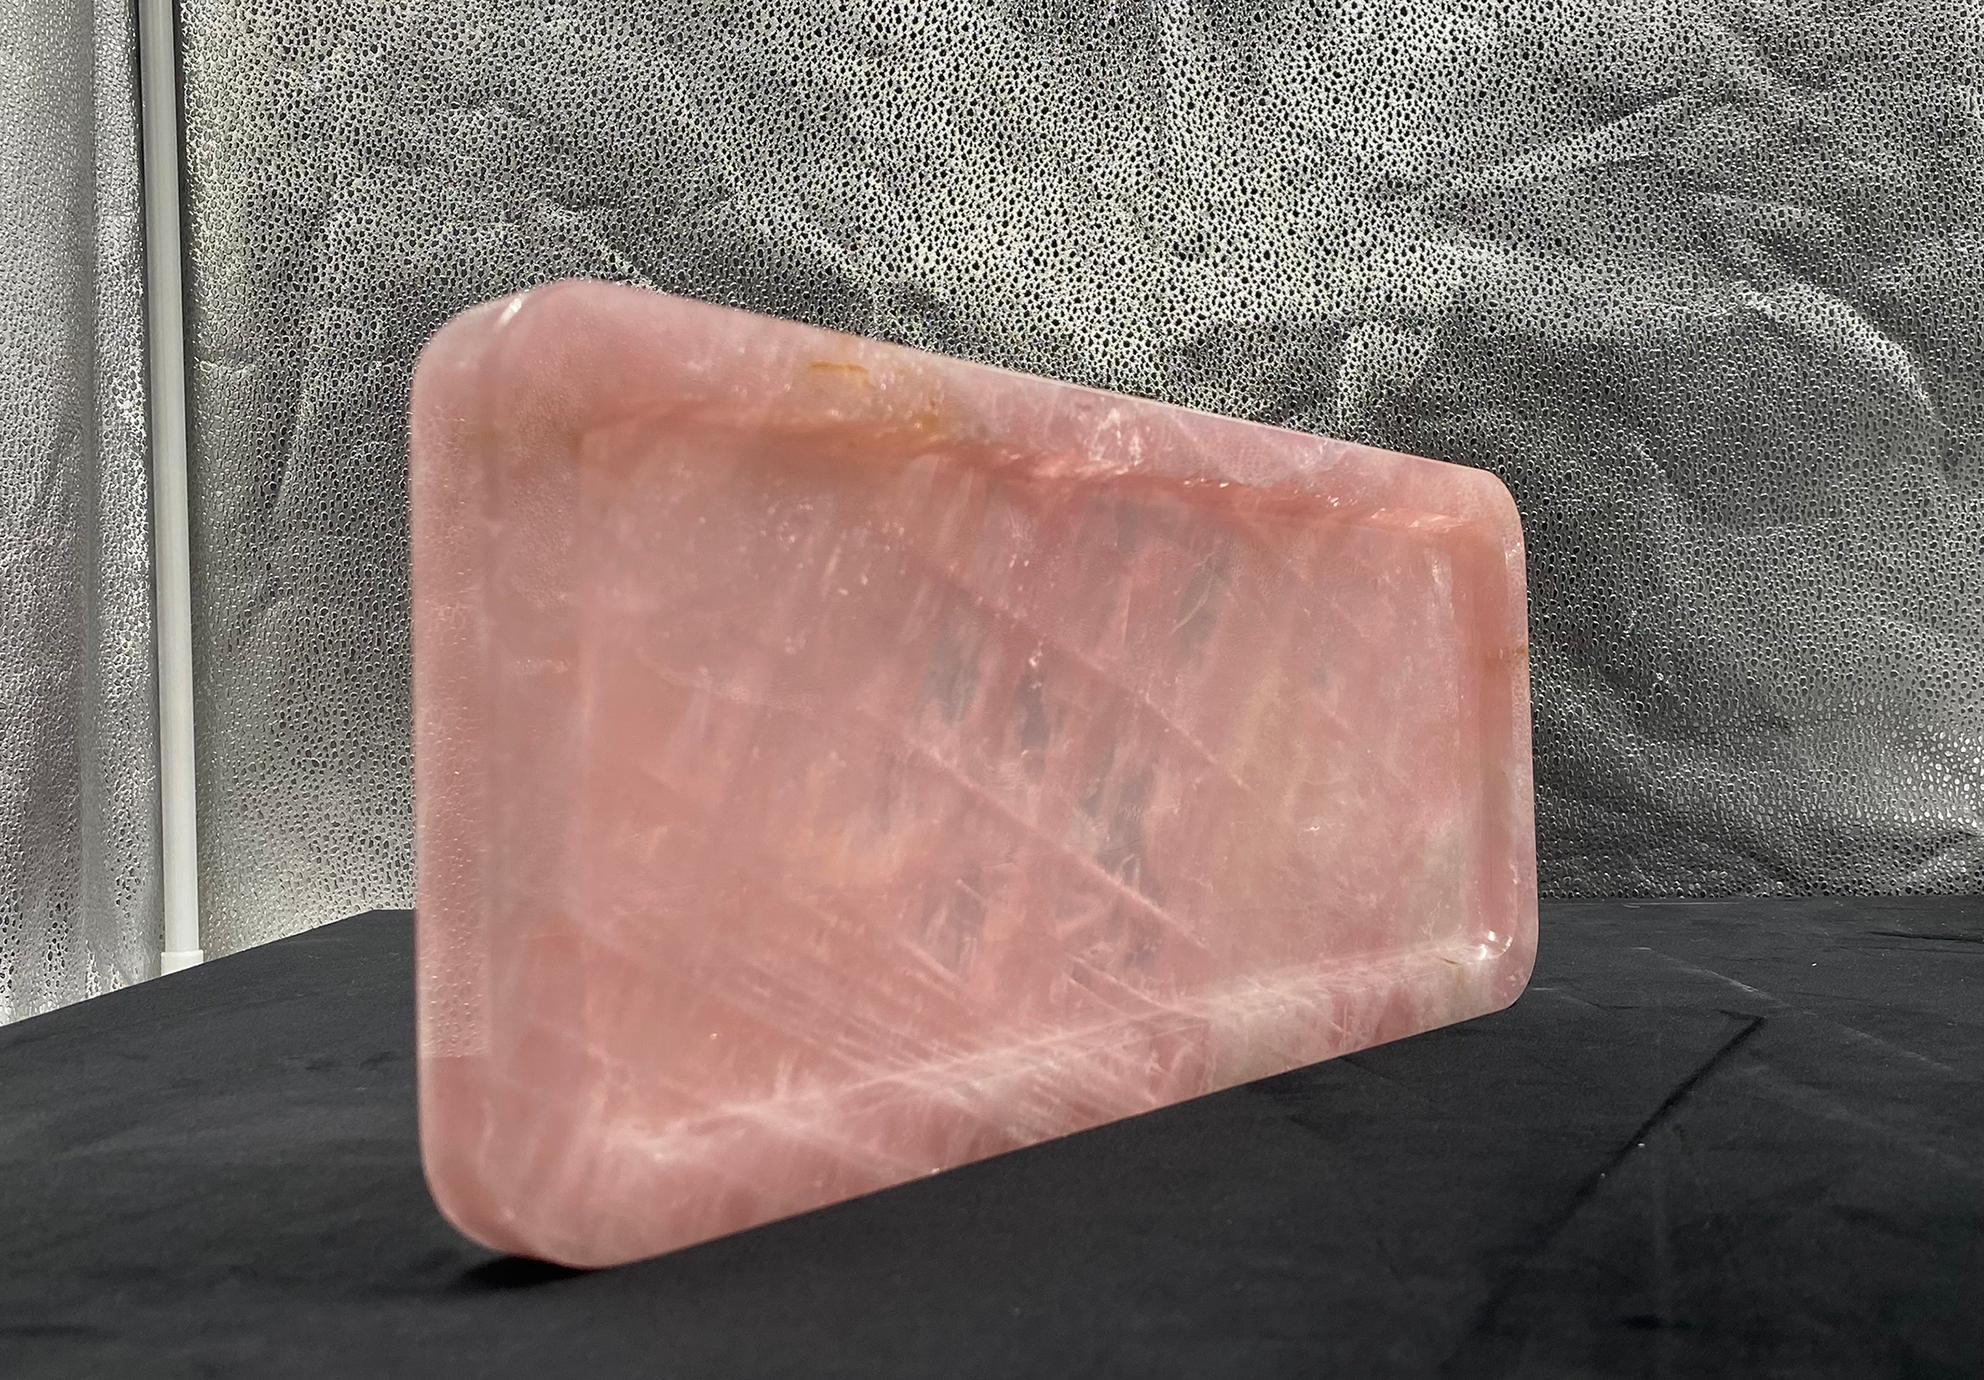 Set of 10 Pink Crystal Tray by Artiss
Dimensions: 35 x 15 cm, 20mm thick 
Materials: Crystal
Also available in White Crystal

Artis is named from artist, whose two -S